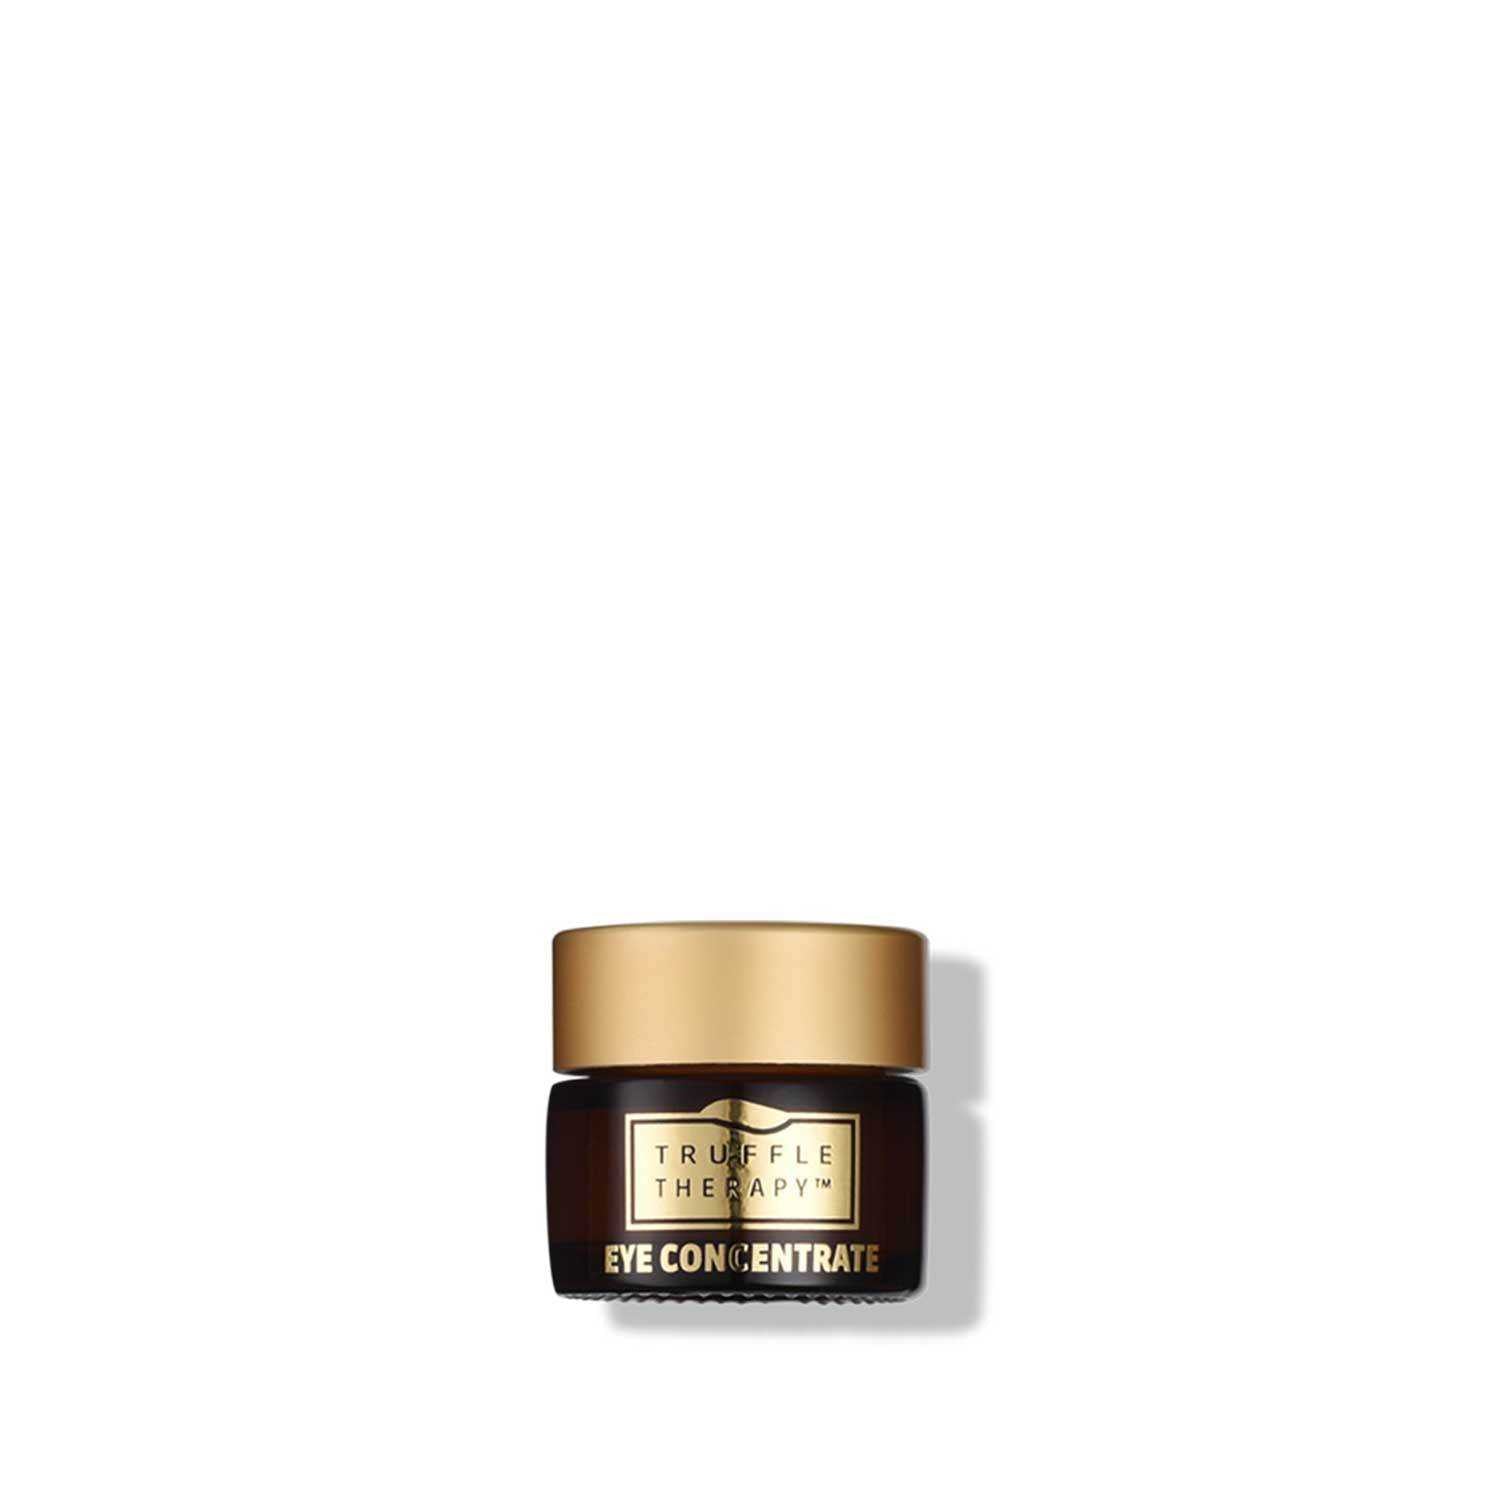 Truffle Therapy Eye Concentrate Travel Deluxe